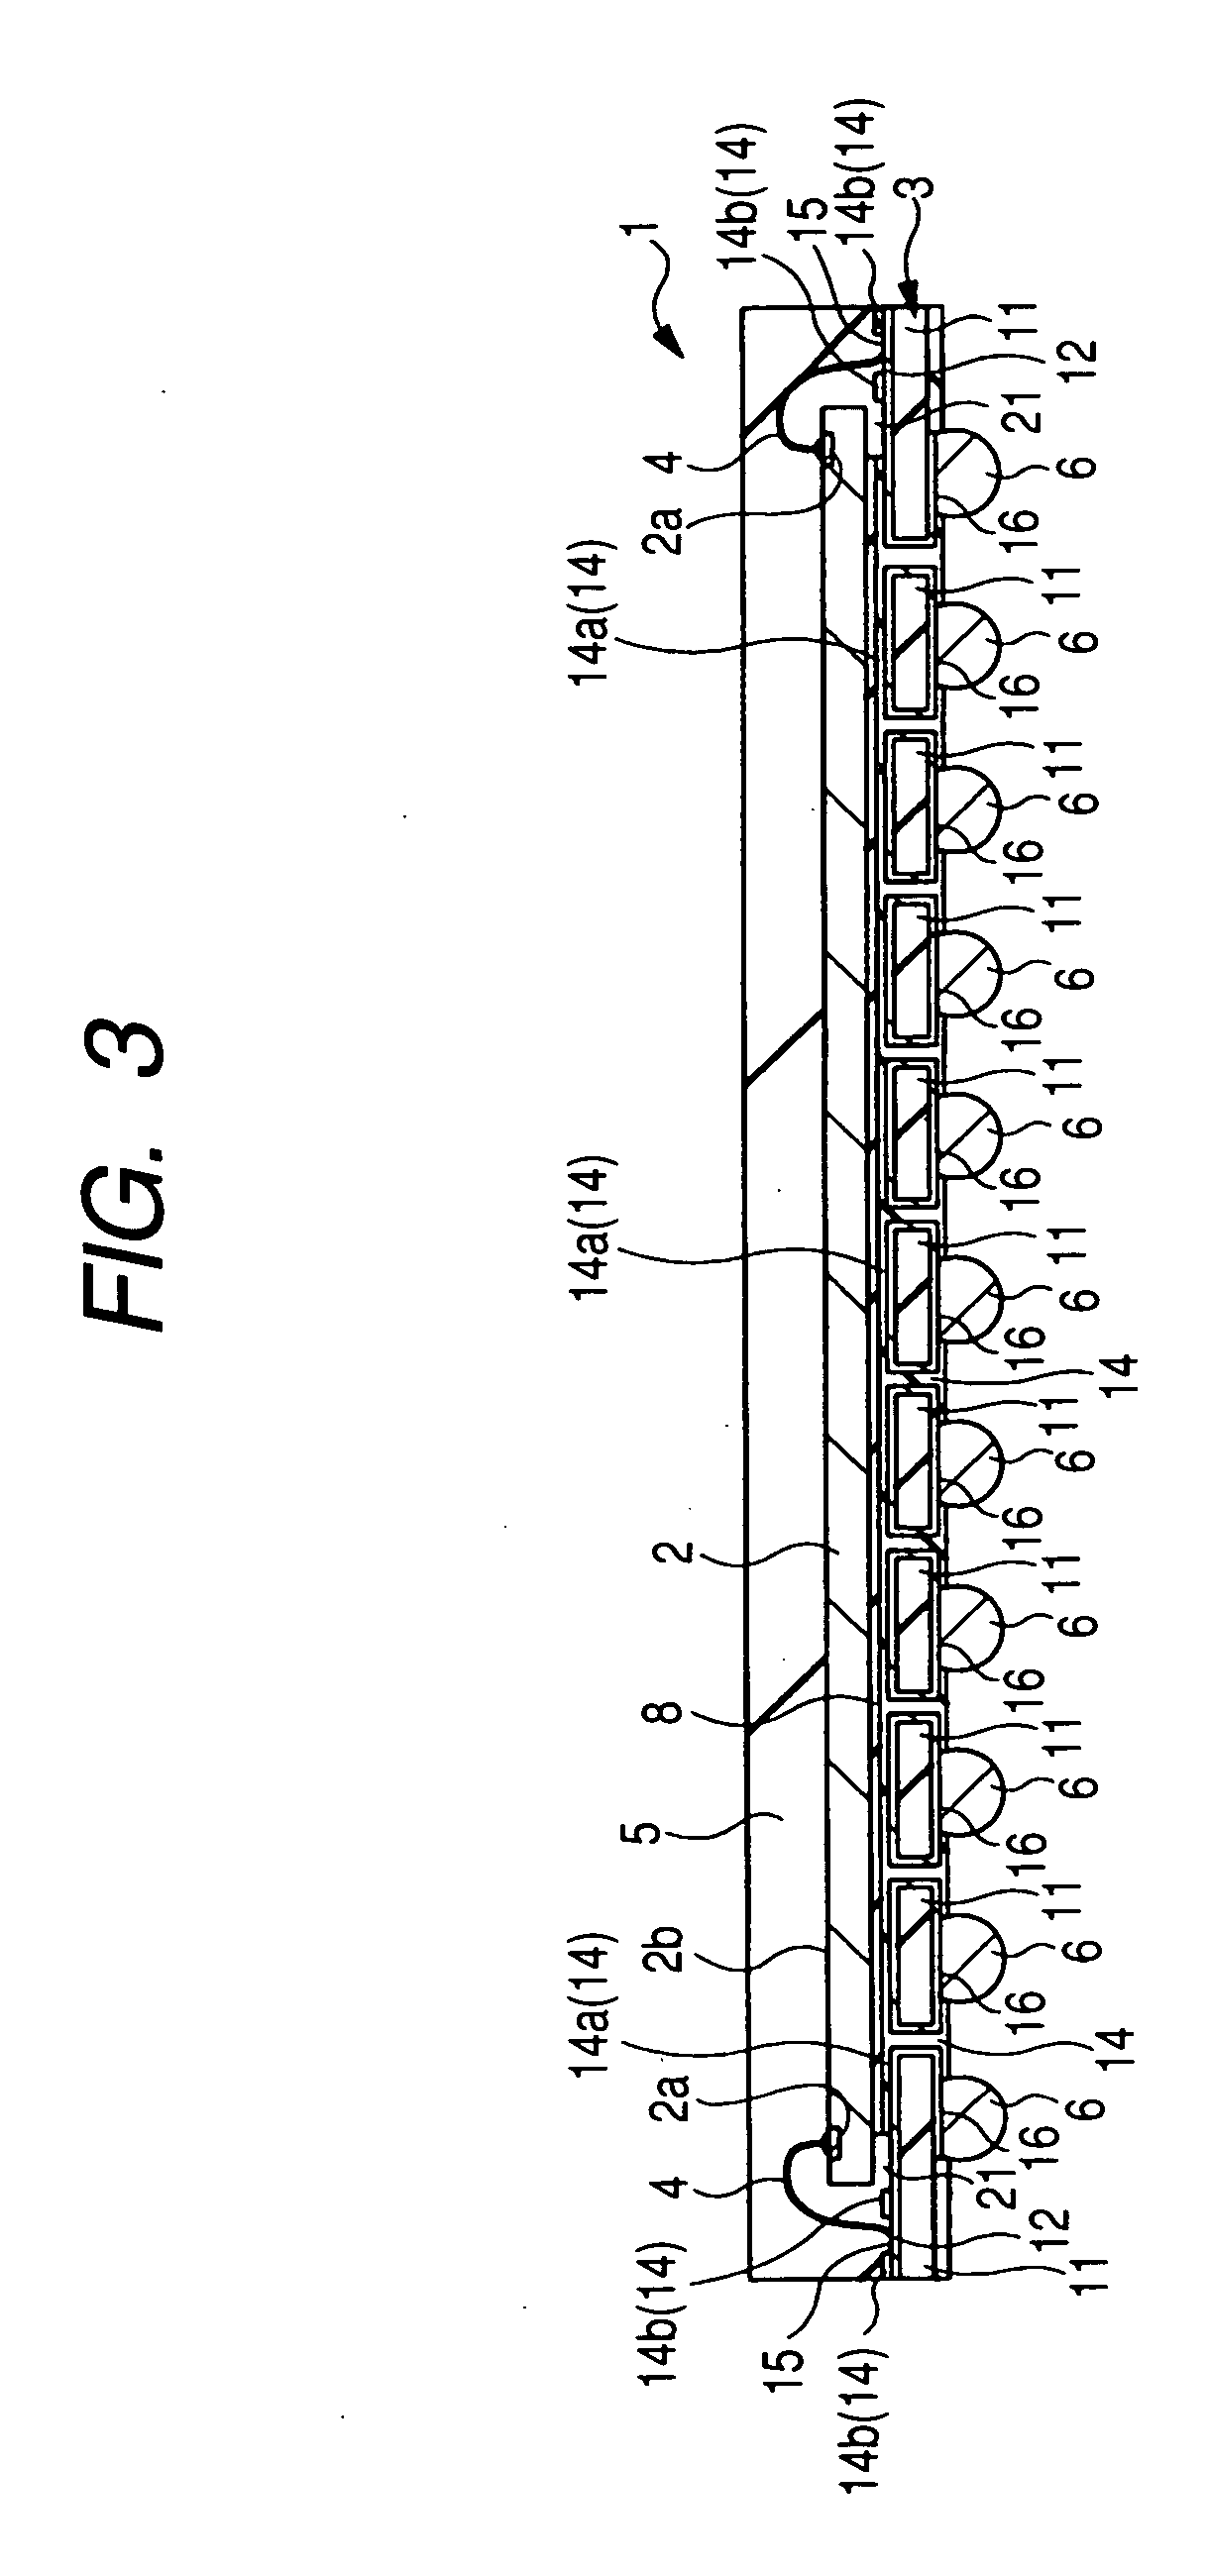 Semiconductor device and a method for manufacturing of the same